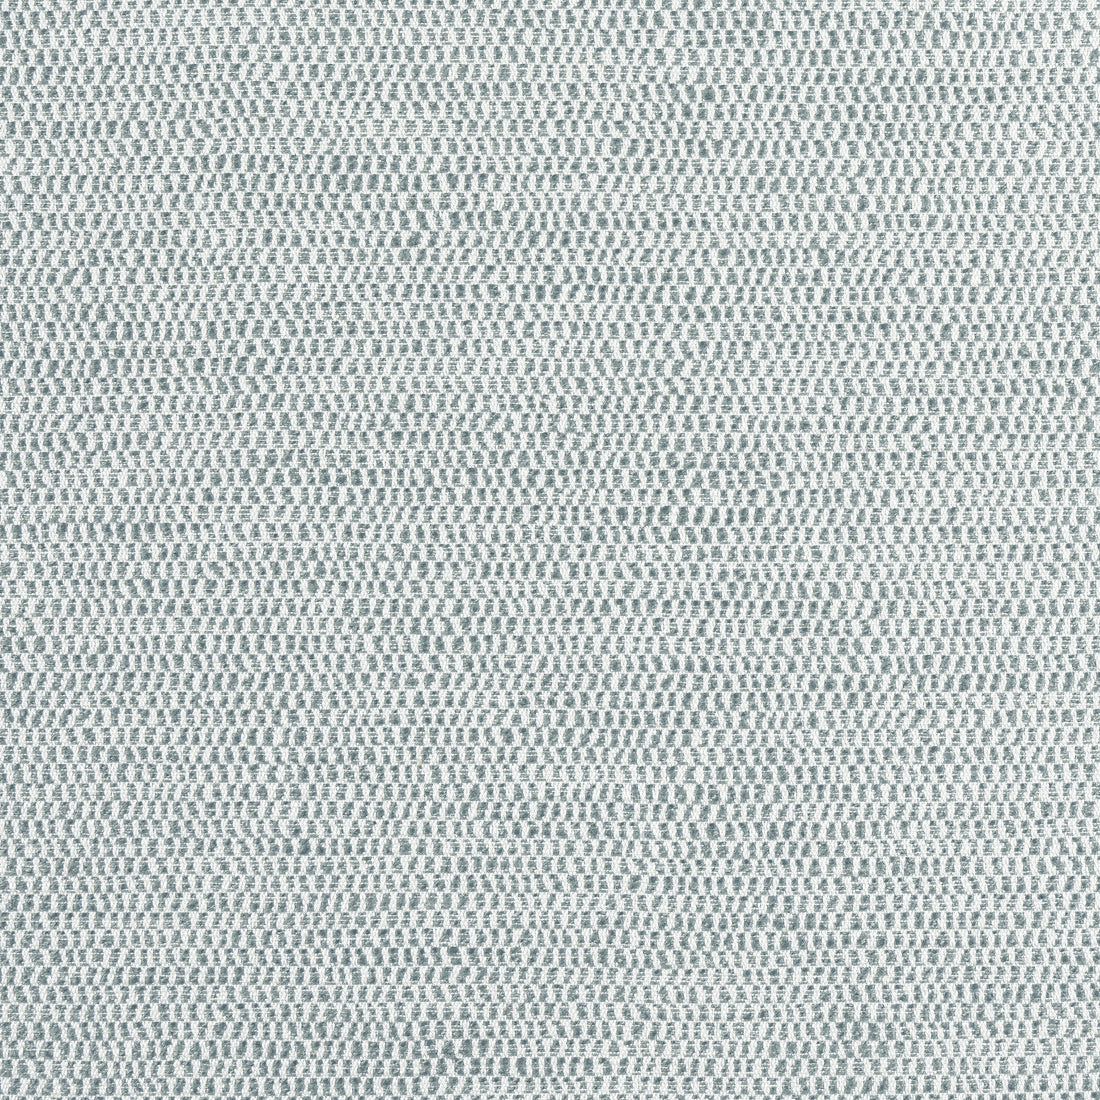 Rito fabric in fog color - pattern number W8116 - by Thibaut in the Sereno collection